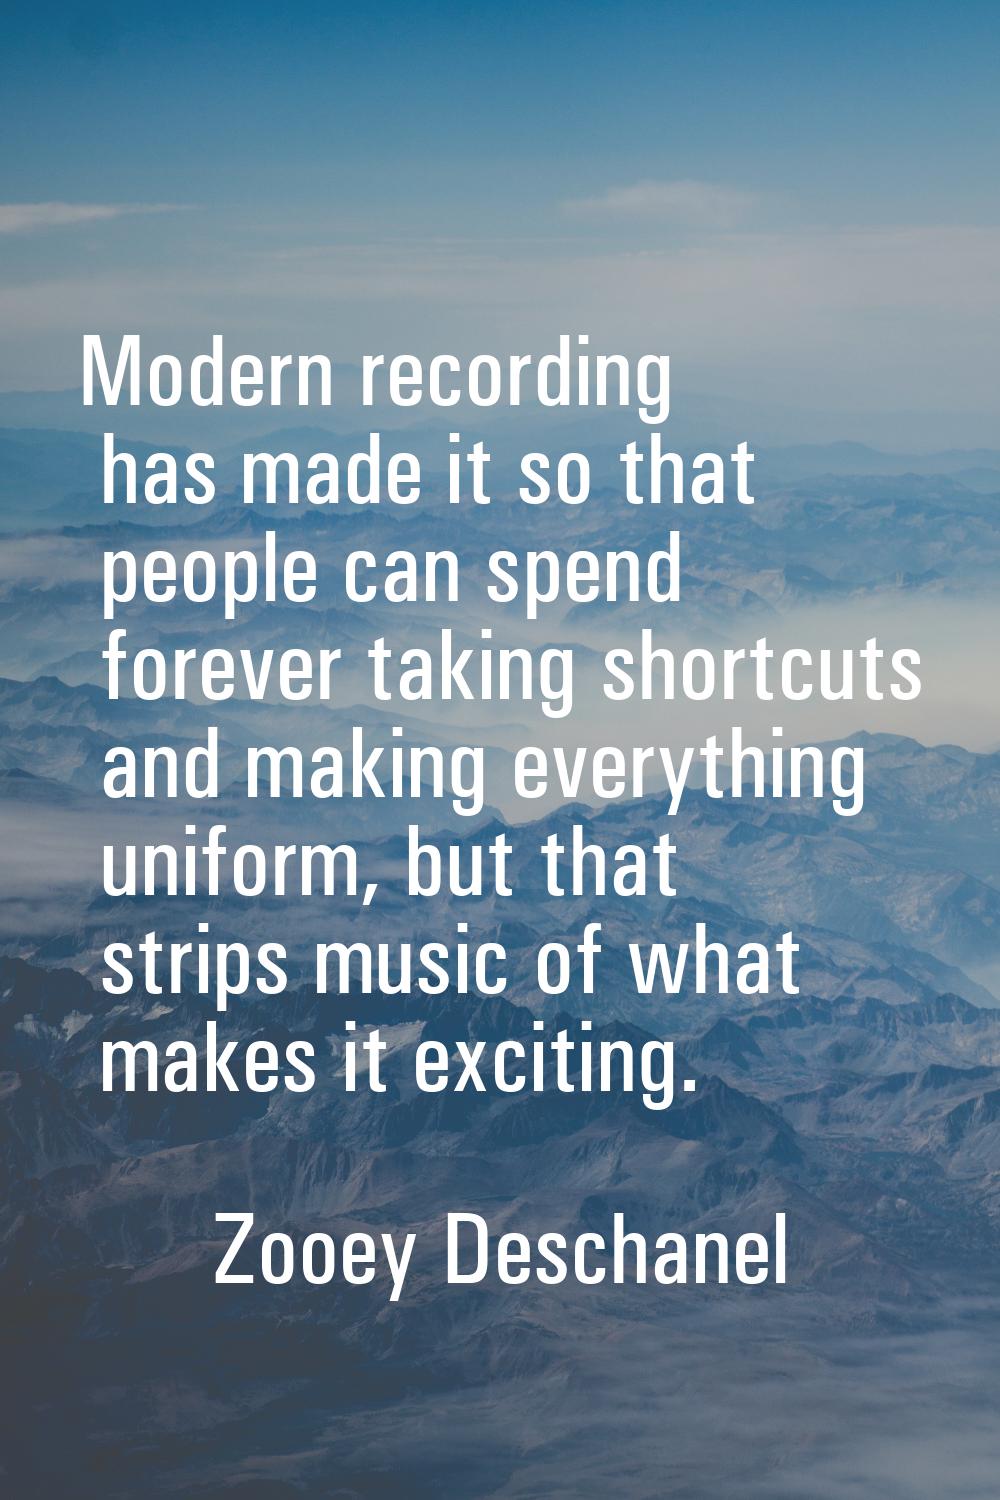 Modern recording has made it so that people can spend forever taking shortcuts and making everythin